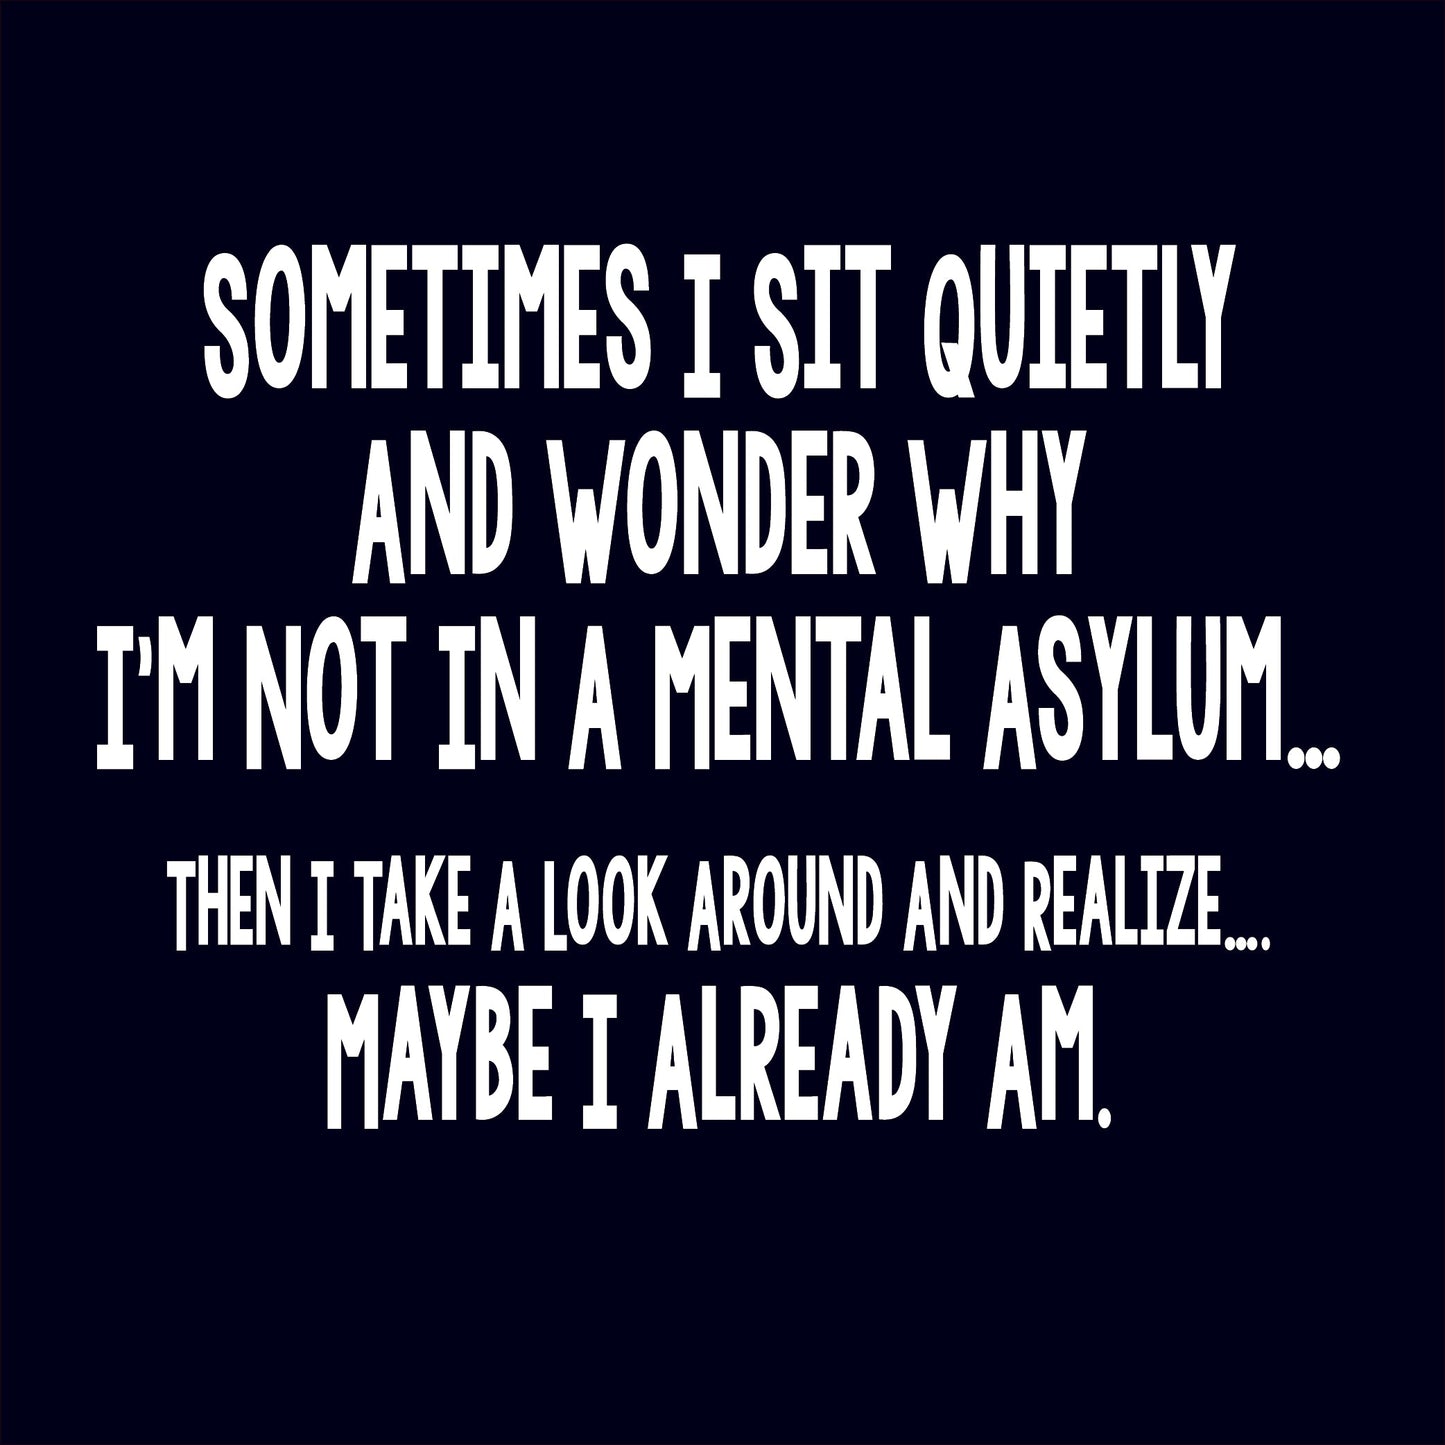 Funny T-Shirts design "Sometimes I Sit Quietly And Wonder Why I'm Not In A Mental Asylum"